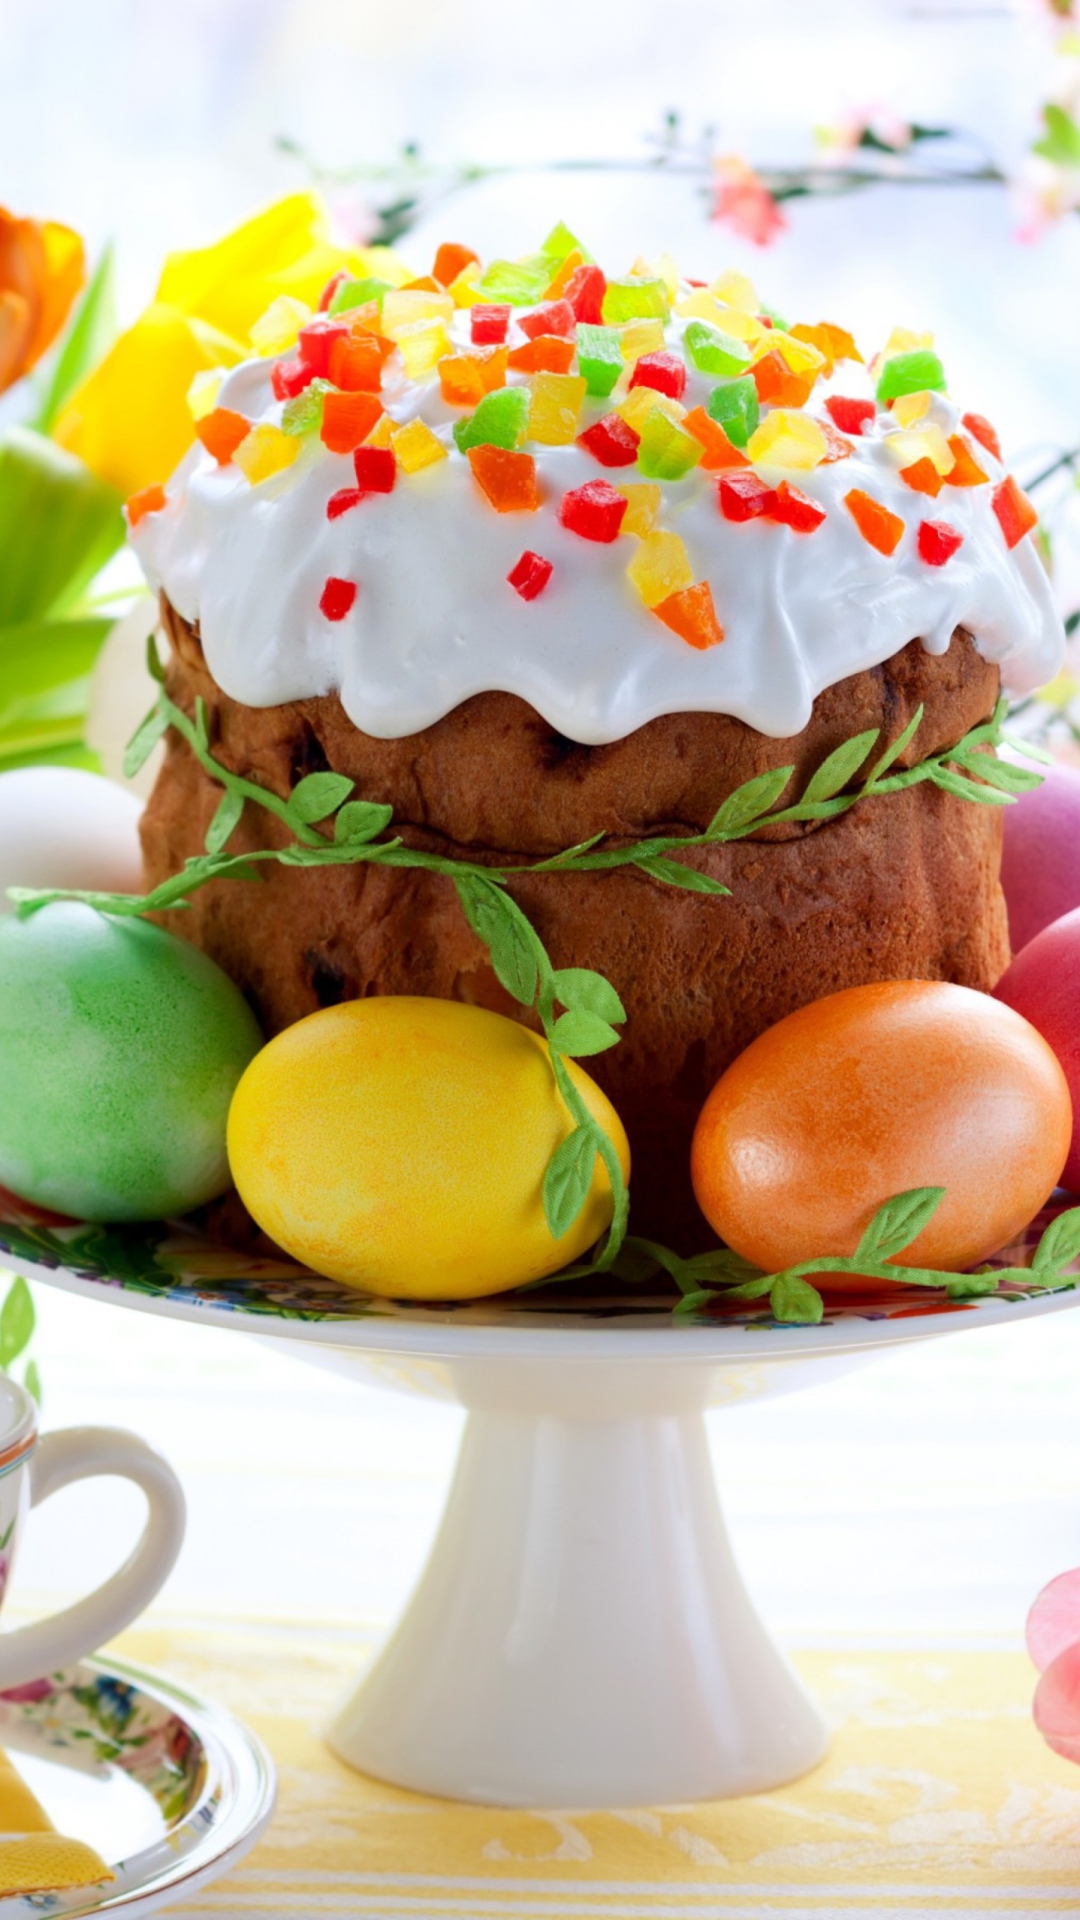 Easter Cake And Eggs wallpaper 1080x1920